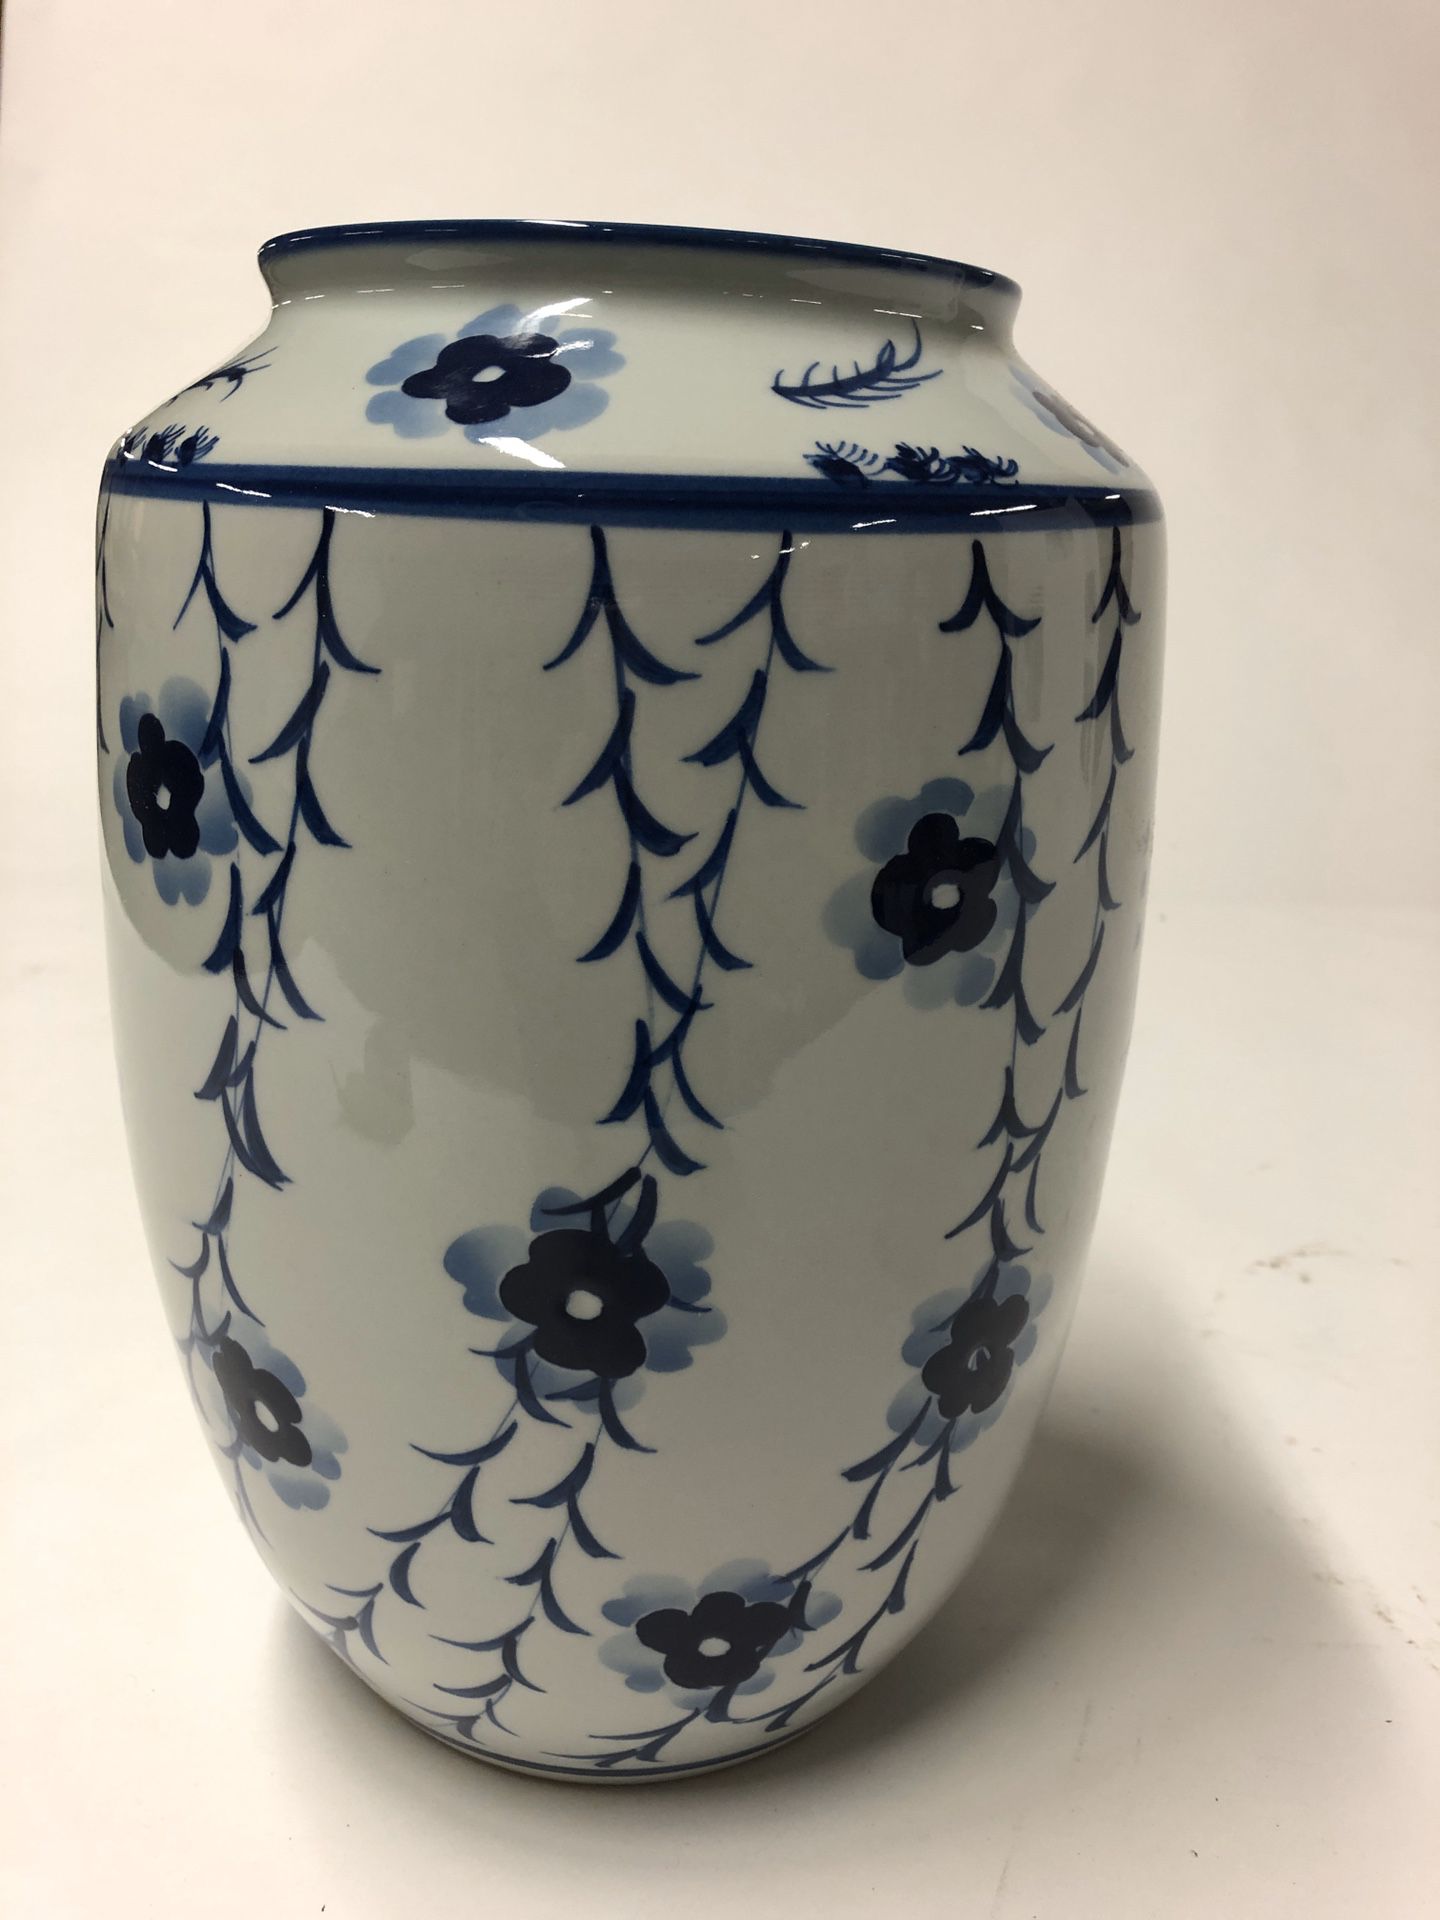 Classic blue and white Chinese porcelain vase